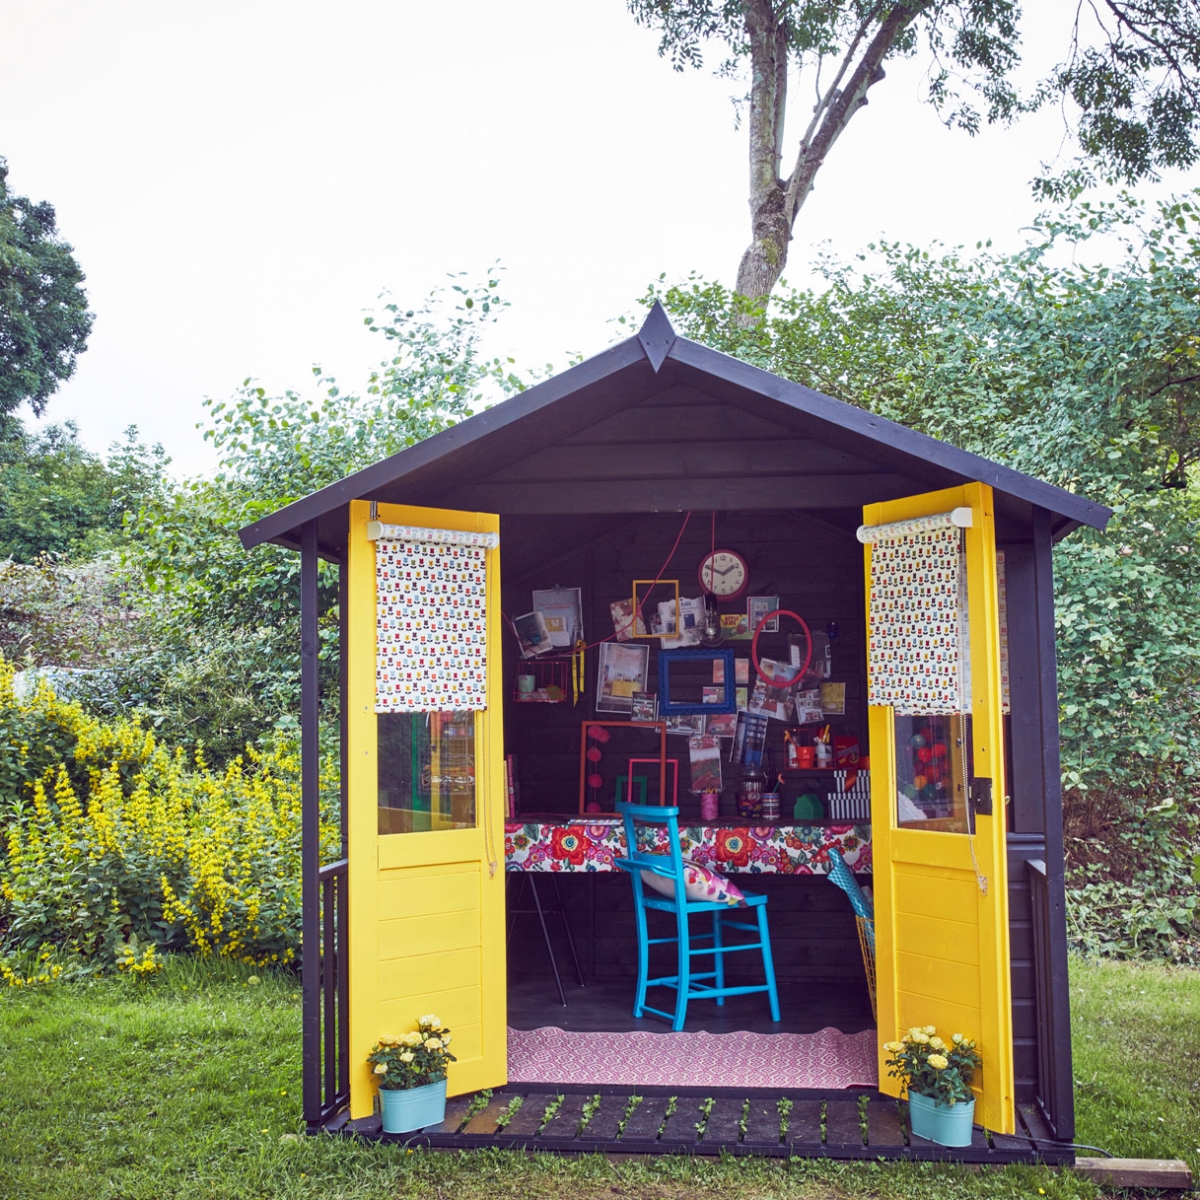 A She shed designed as a crafting DIY and upcycling creaive workspace at the end of the garden. The balck weatherboard exterior is set off by bright yellow doors and patterned fabric blinds